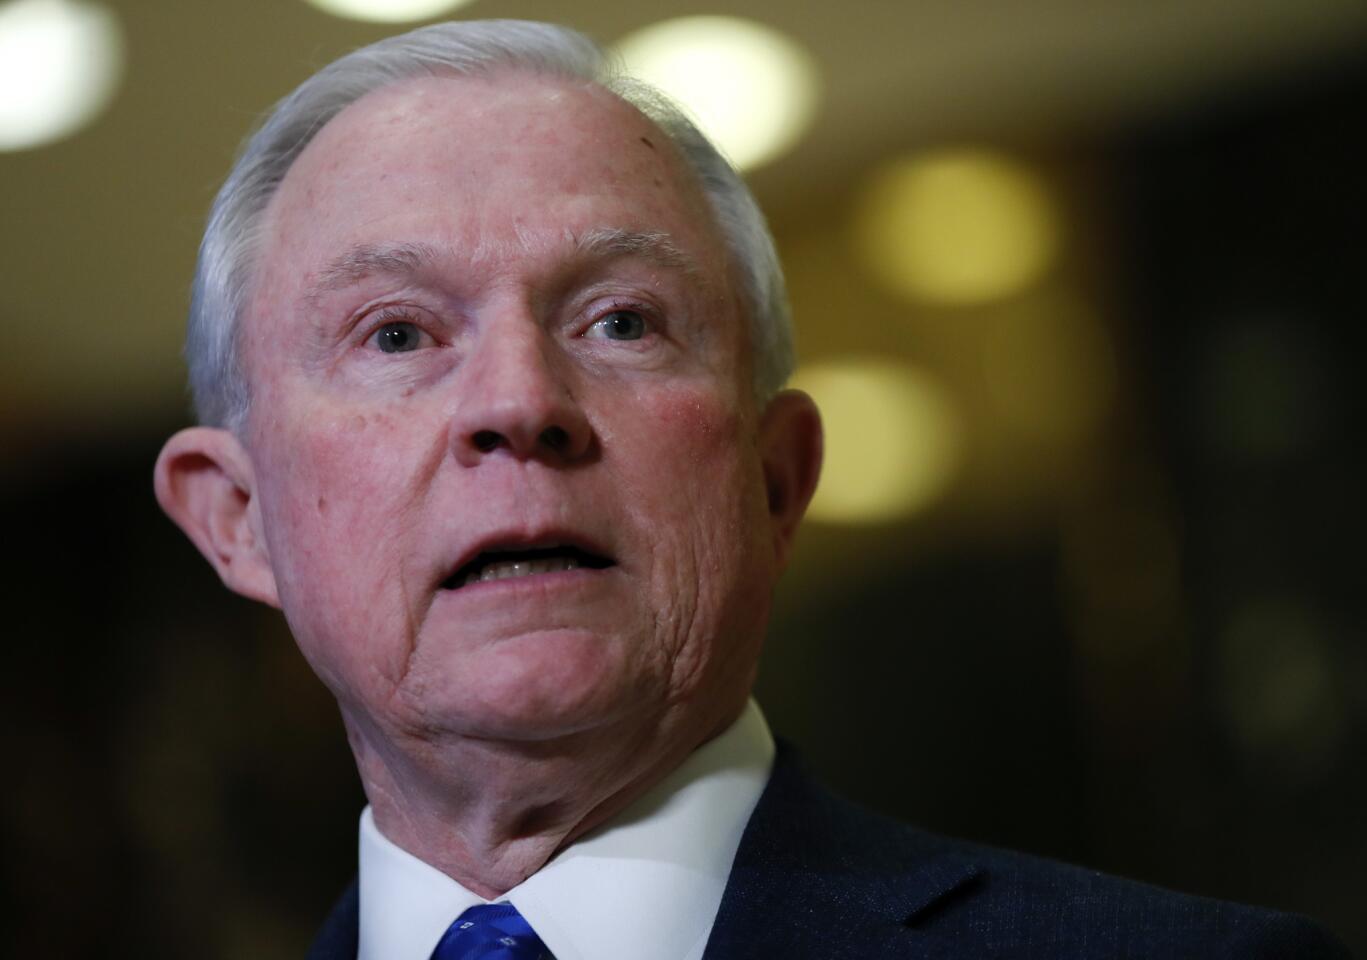 Alabama Sen. Jeff Sessions, the first senator to endorse Trump, is known for his hardline views on immigration. Sessions could face obstacles in his confirmation hearing, even with Republicans in control of the Senate. He withdrew from consideration for a federal judgeship in 1986 after being accused of making racist comments while serving as a U.S. attorney in Alabama. — AP